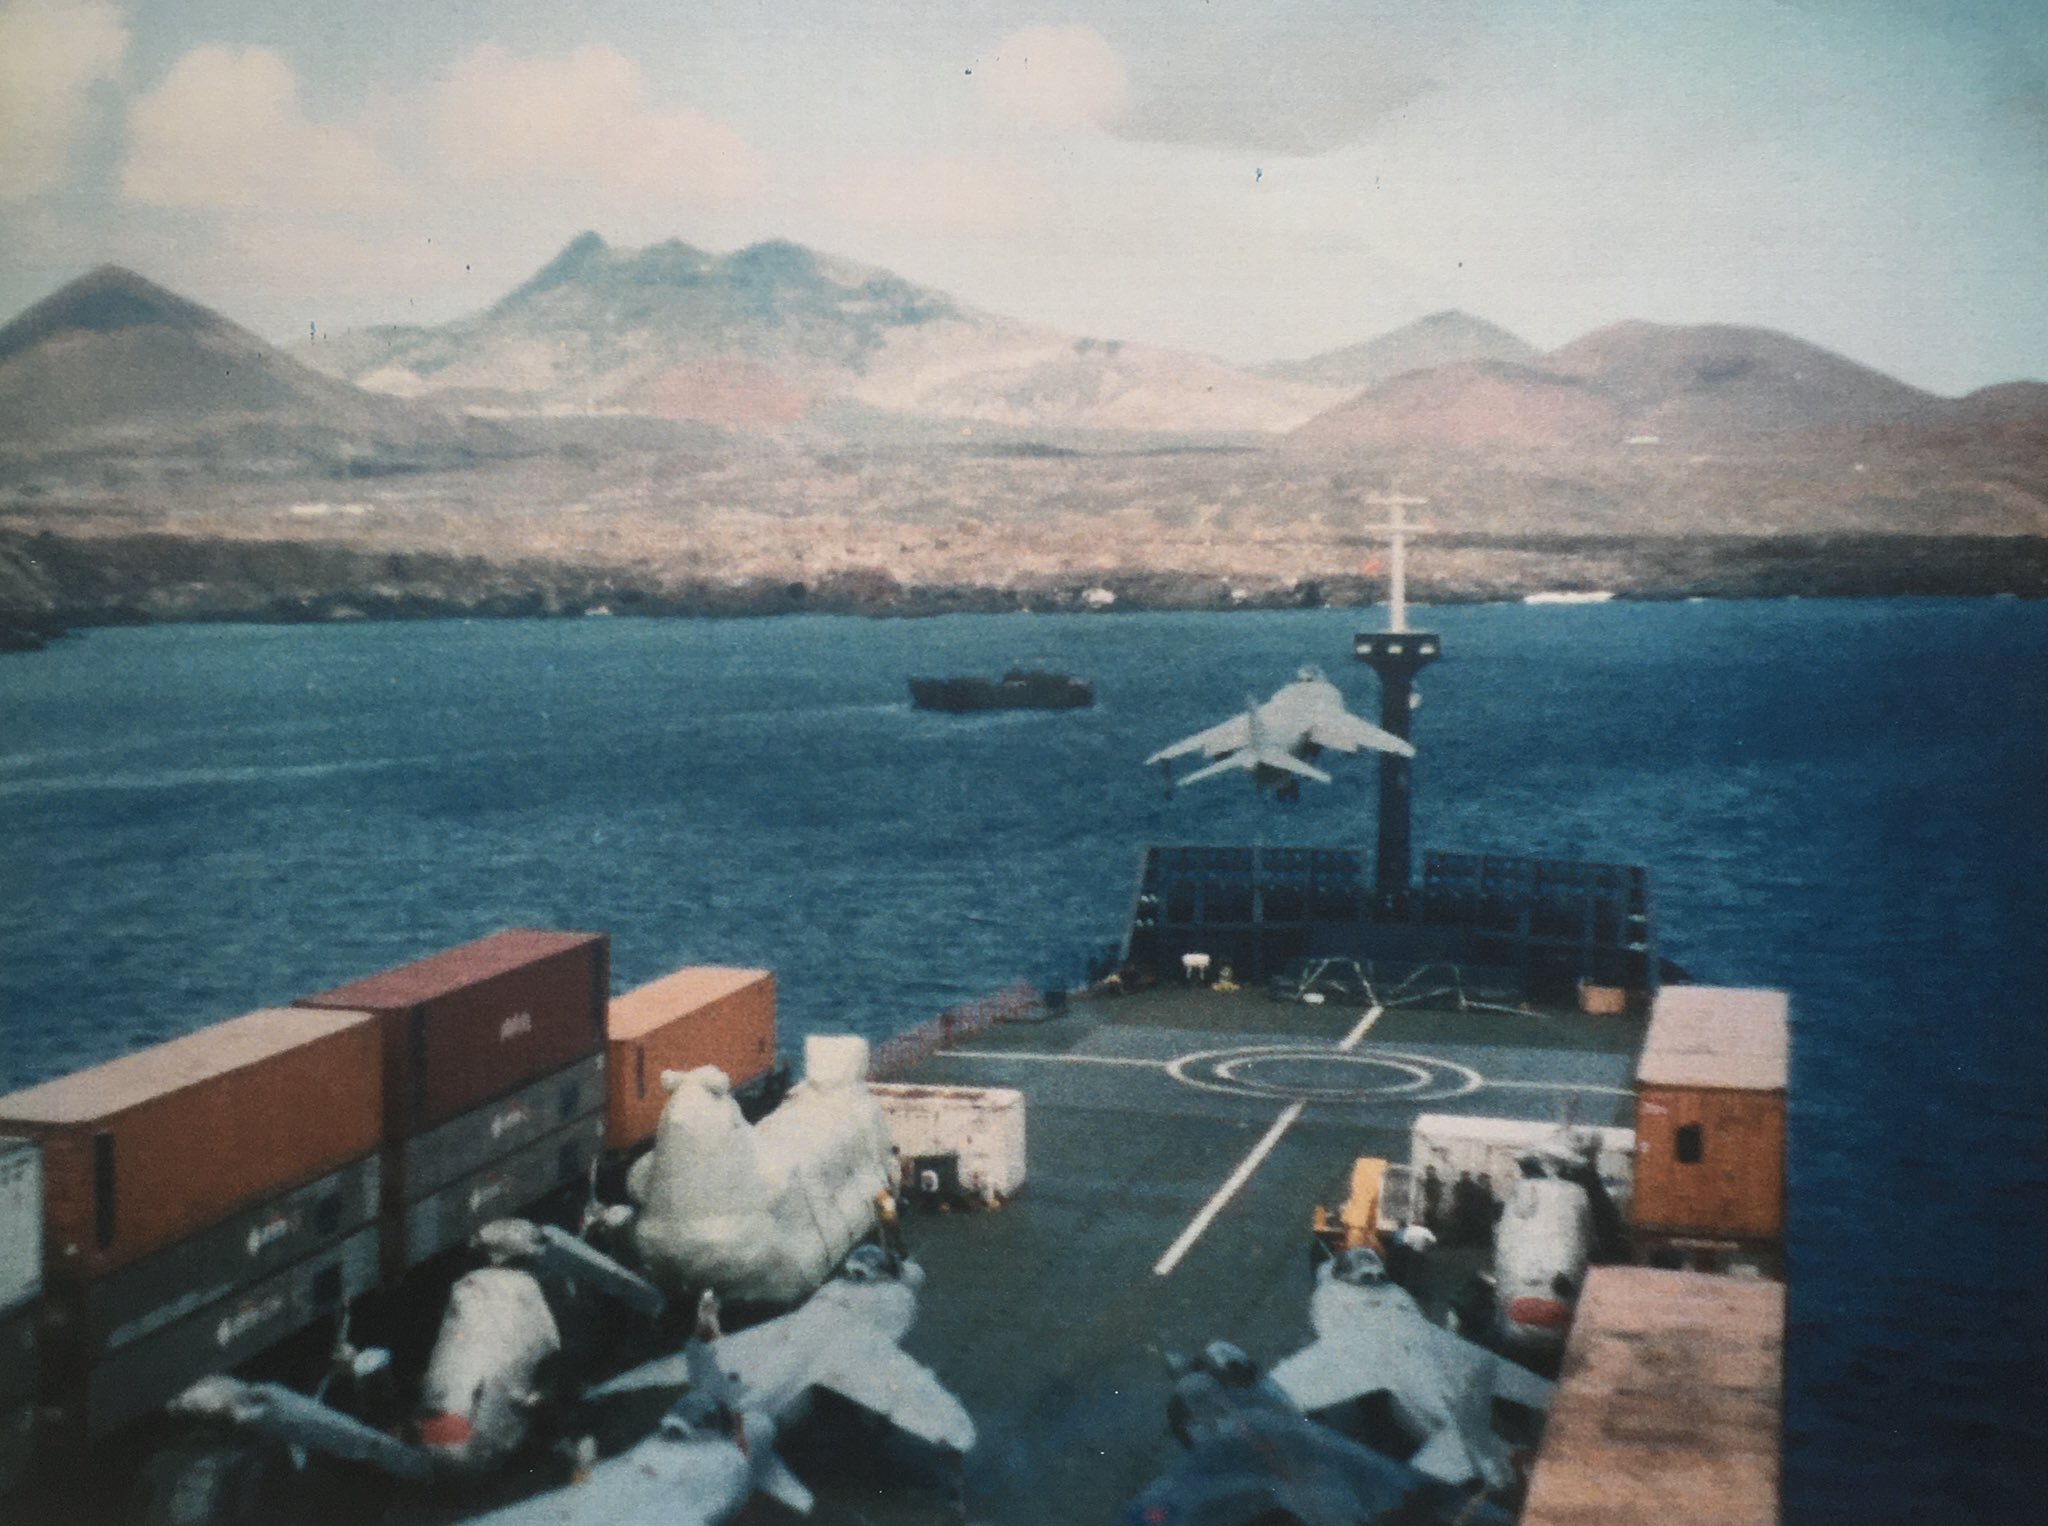 809 Naval Air Squadron’s Sea Harriers abroad Atlantic Conveyor, off Ascension Island in 1982. Image: Rowland White